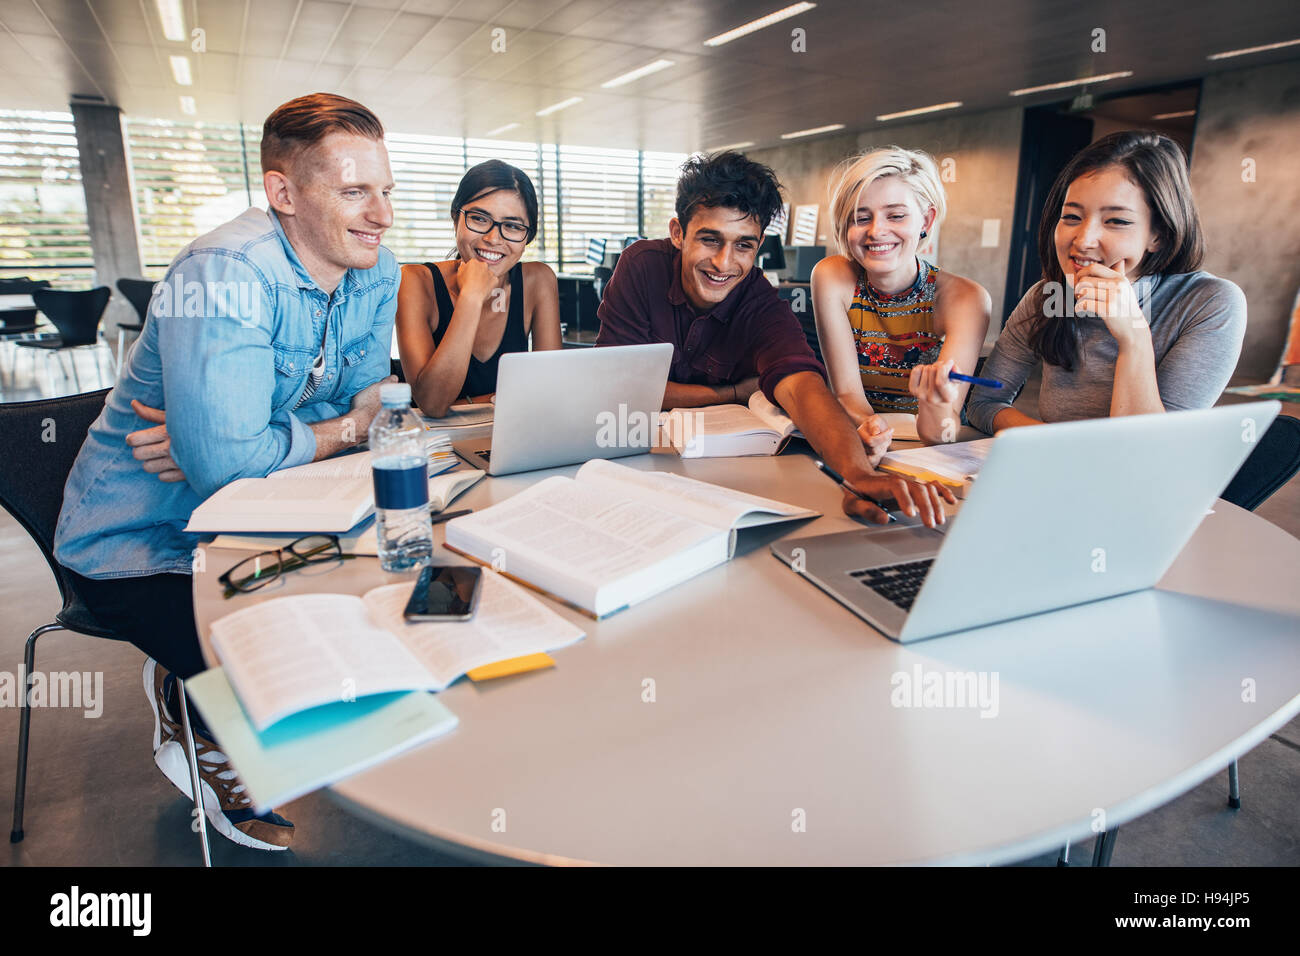 Multiethnic group of young people studying together at a table looking at laptop. Young students in cooperation with their school assignment. Stock Photo